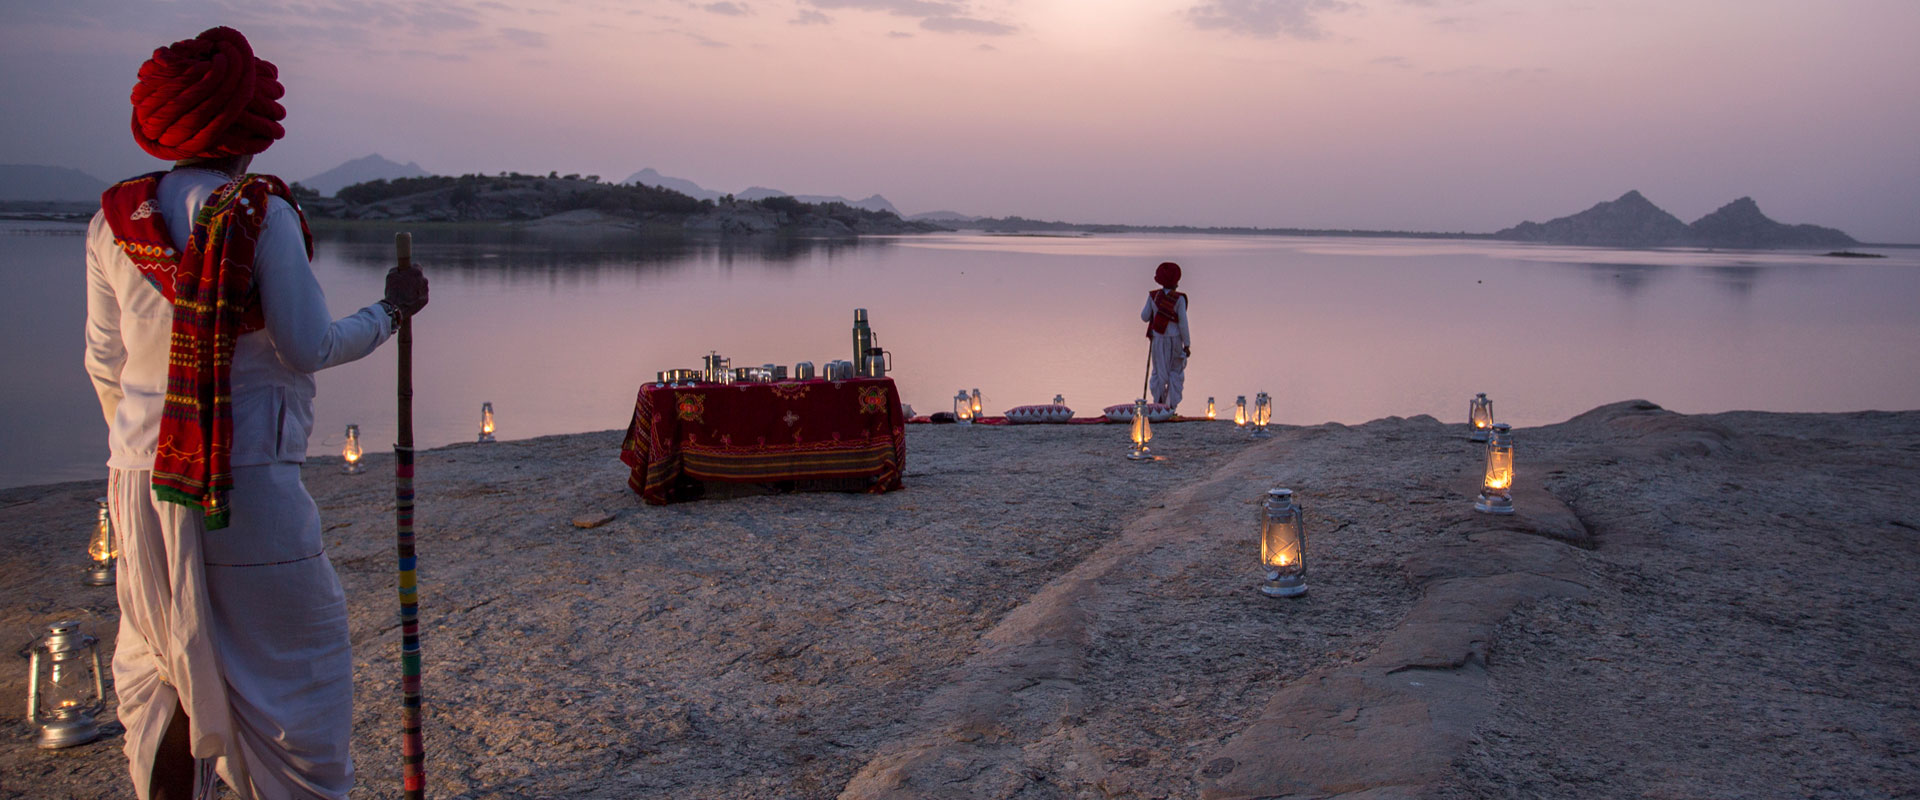 Indian Safaris Luxury Safari Holidays in India Mountbatten Lodge - truly unique luxury hotel in Rajasthan, India